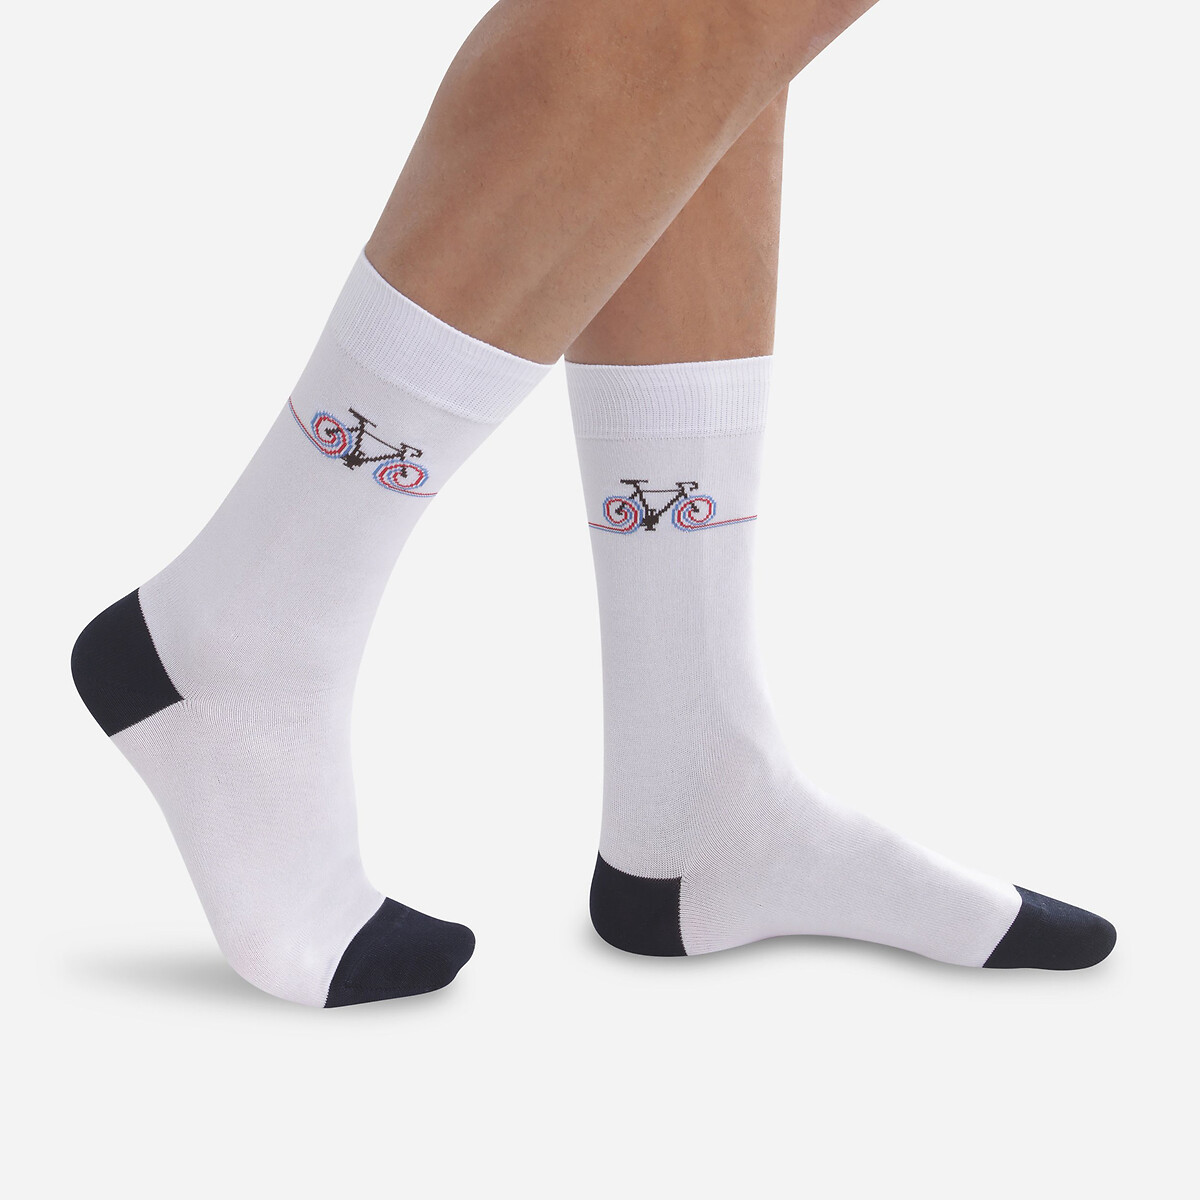 Pair of Tour de France Socks in Brushed Cotton Mix